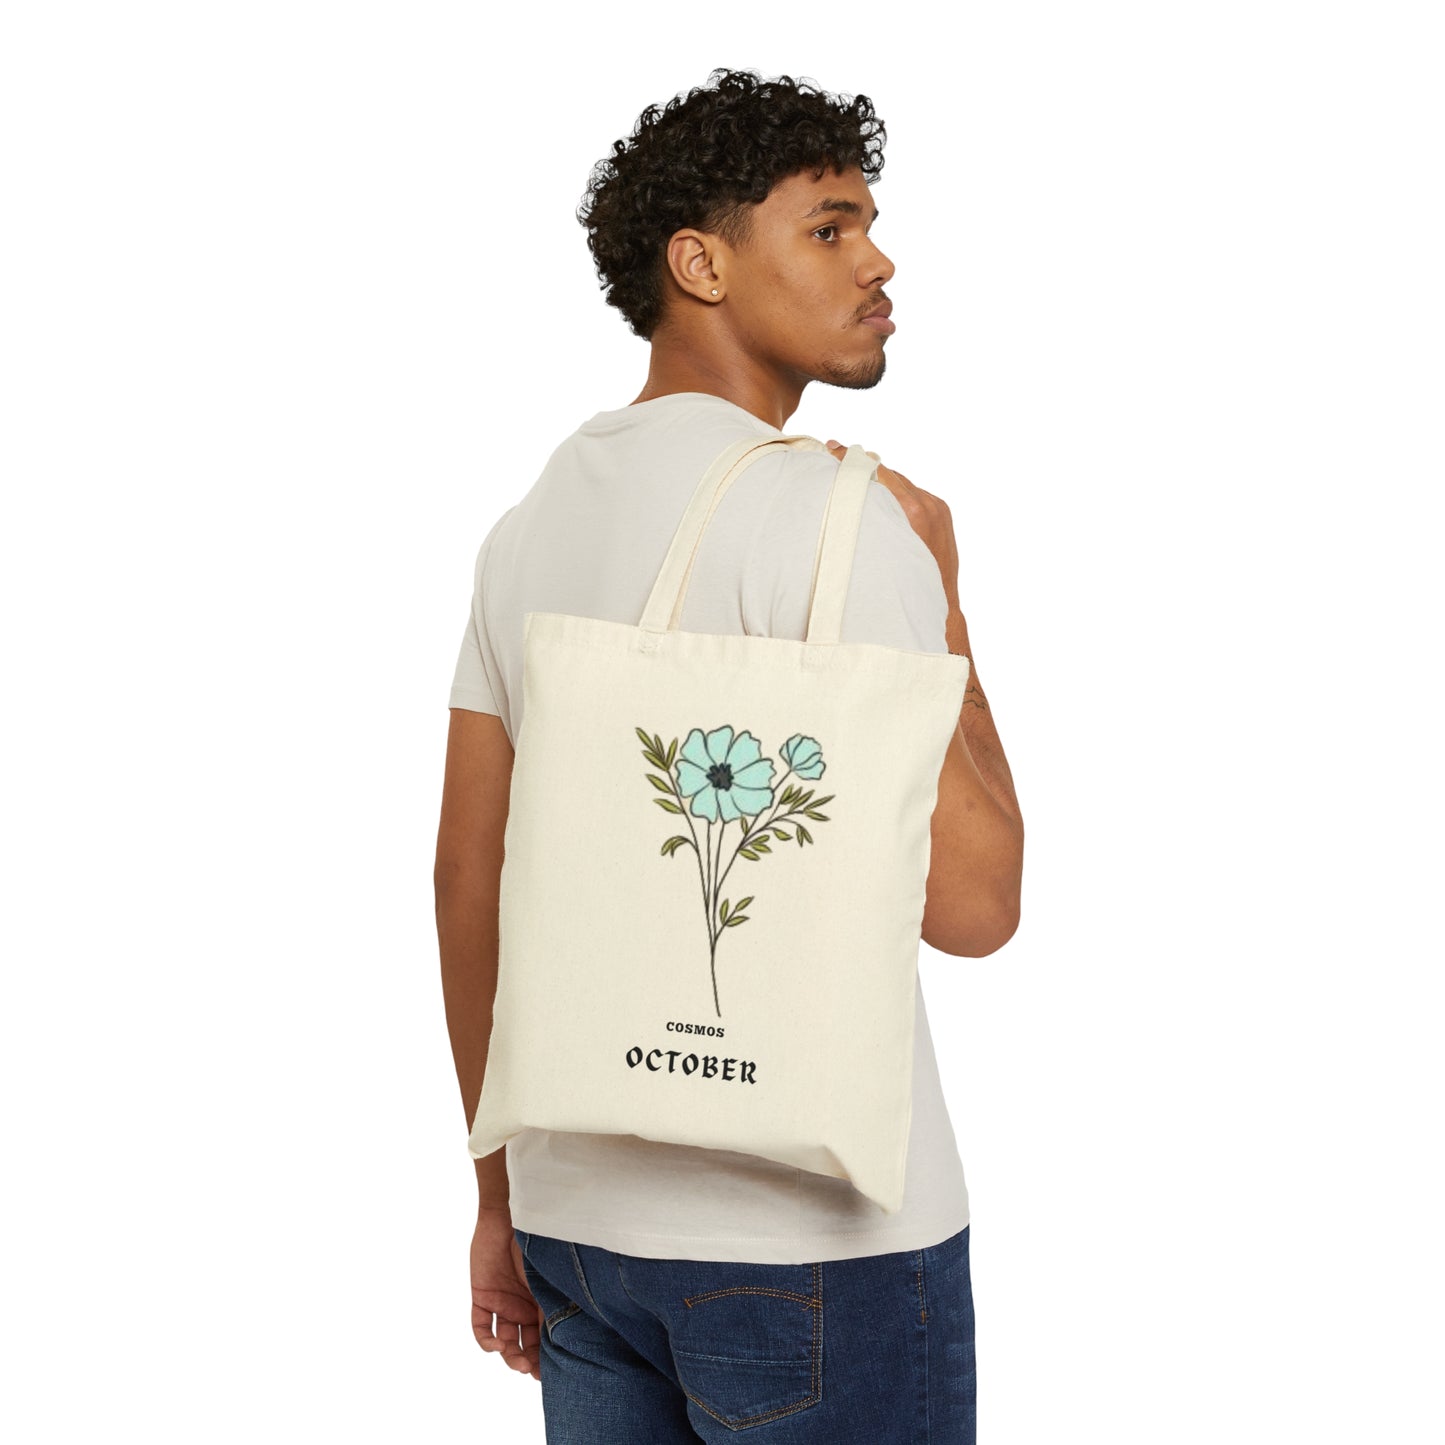 OCTOBER BIRTH MONTH FLOWER TOTE BAG GIFT (COSMOS)